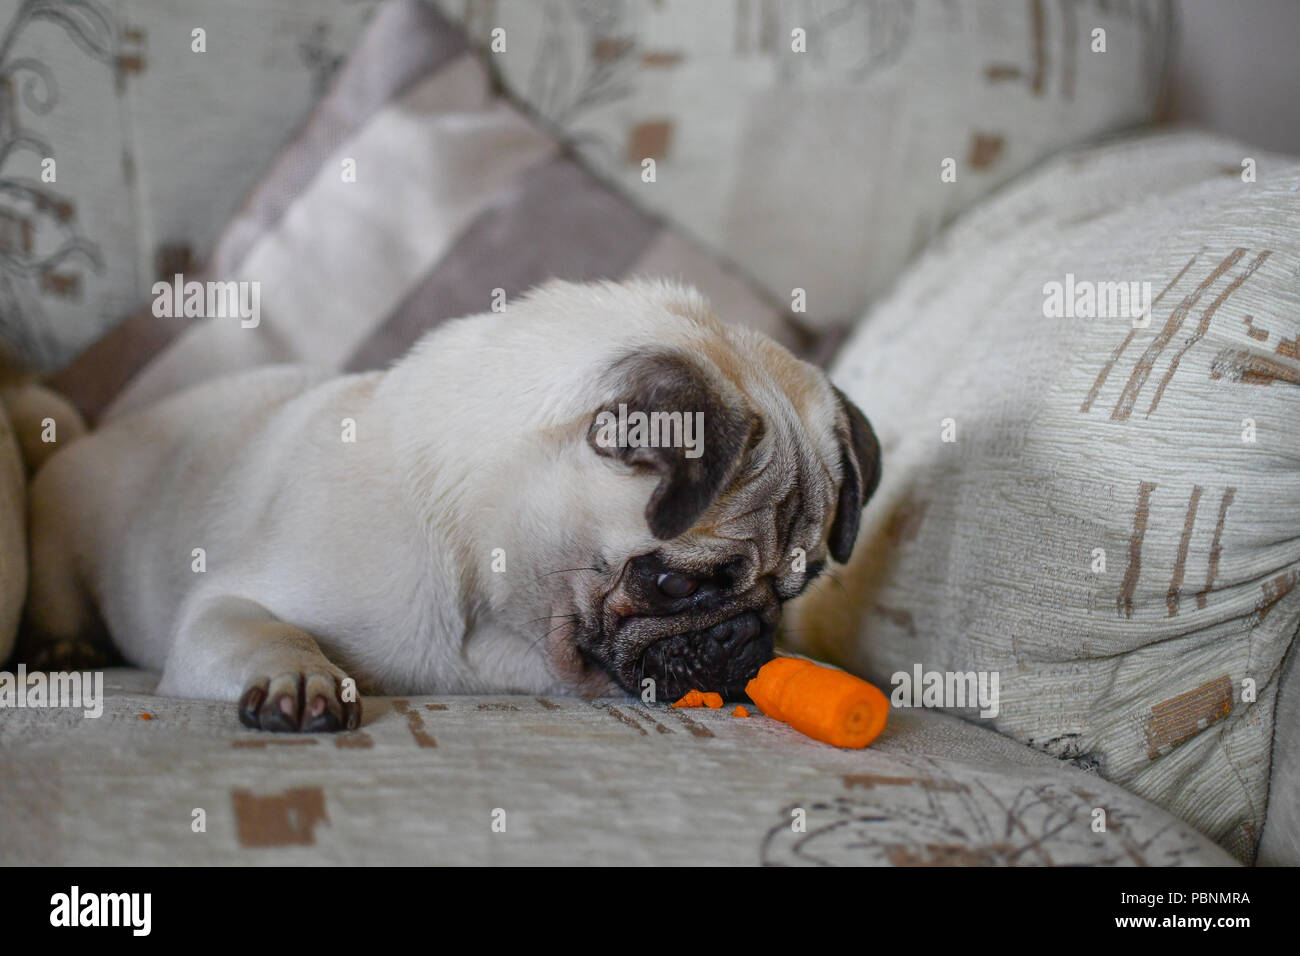 Cute Pug looking at Carrot ( diet ) Stock Photo